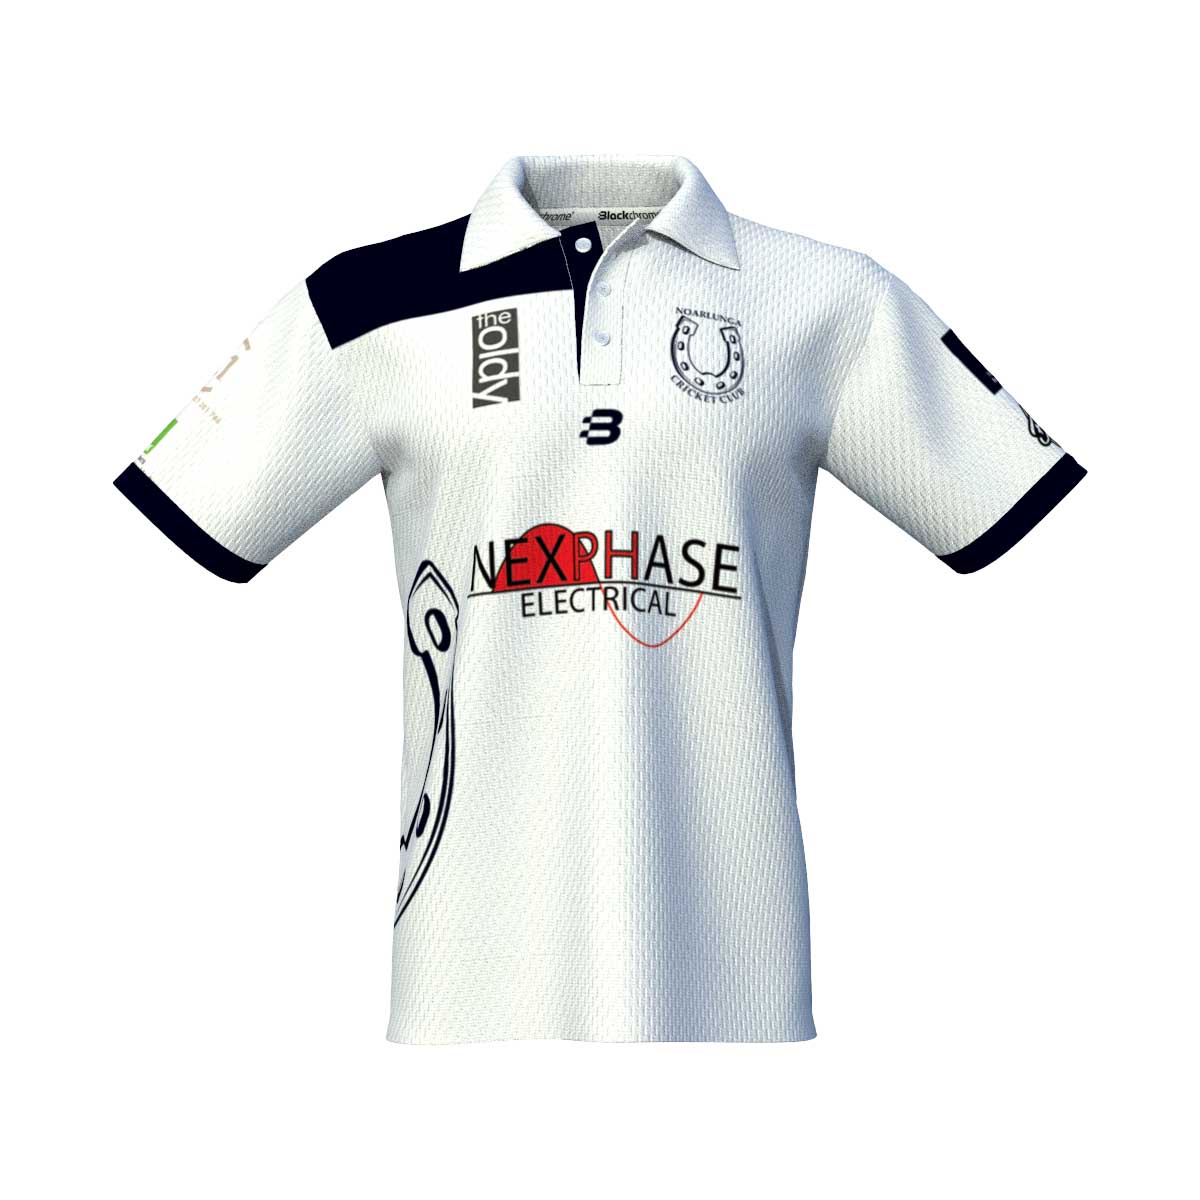 Cricket Jersey Shirt Kit Customized It with Name Number Logo Shirt Only